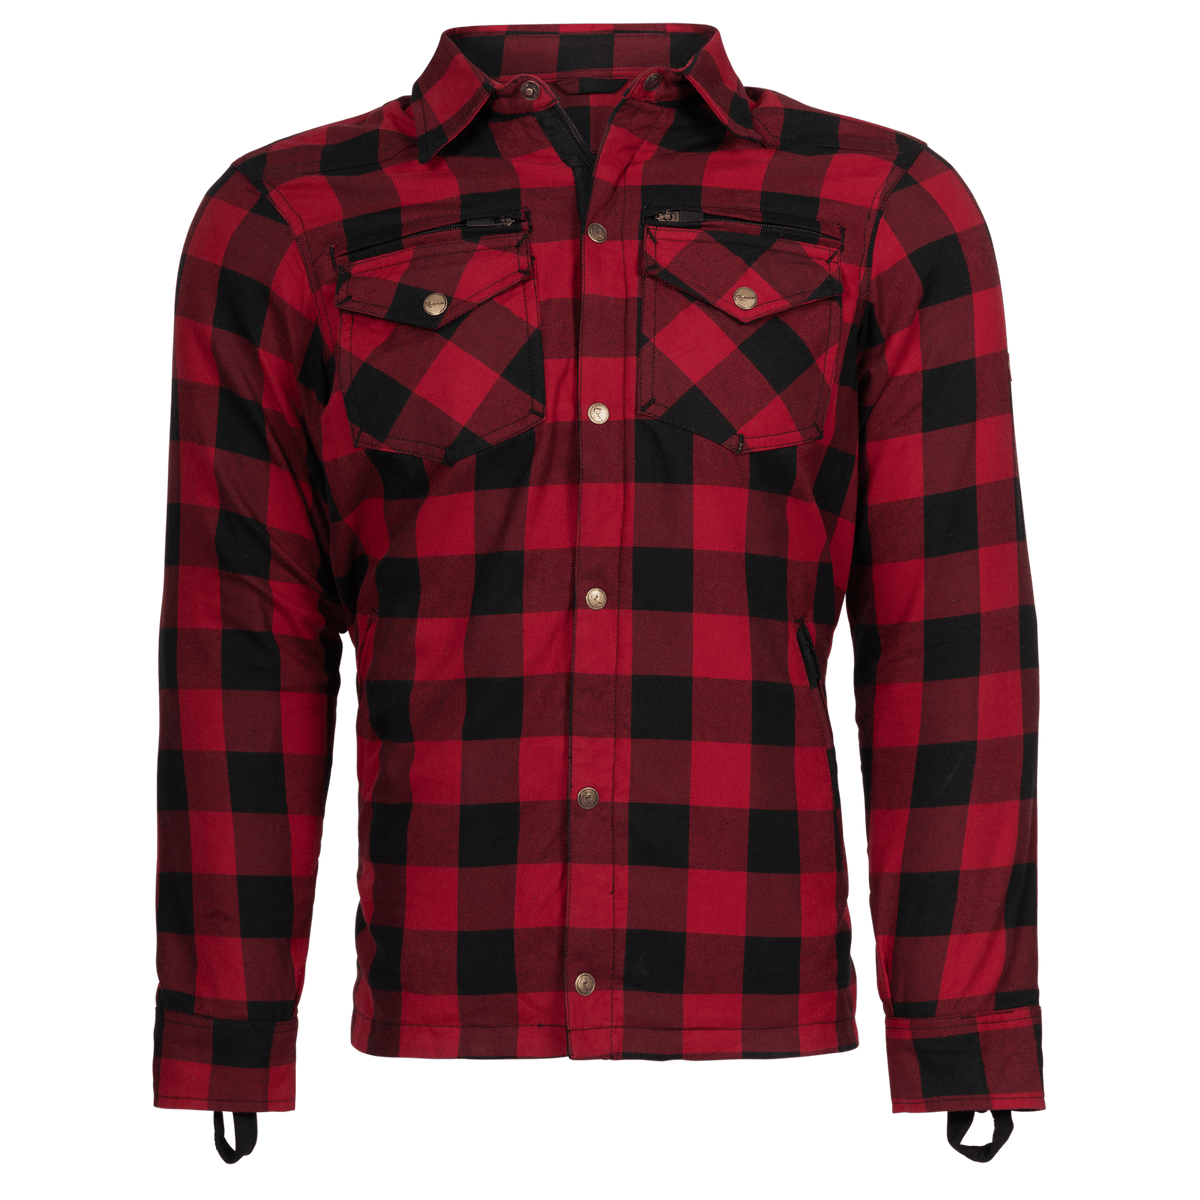 RAVEN Moto - Motorcycle Jackets | REAPER Street Armored Flannel